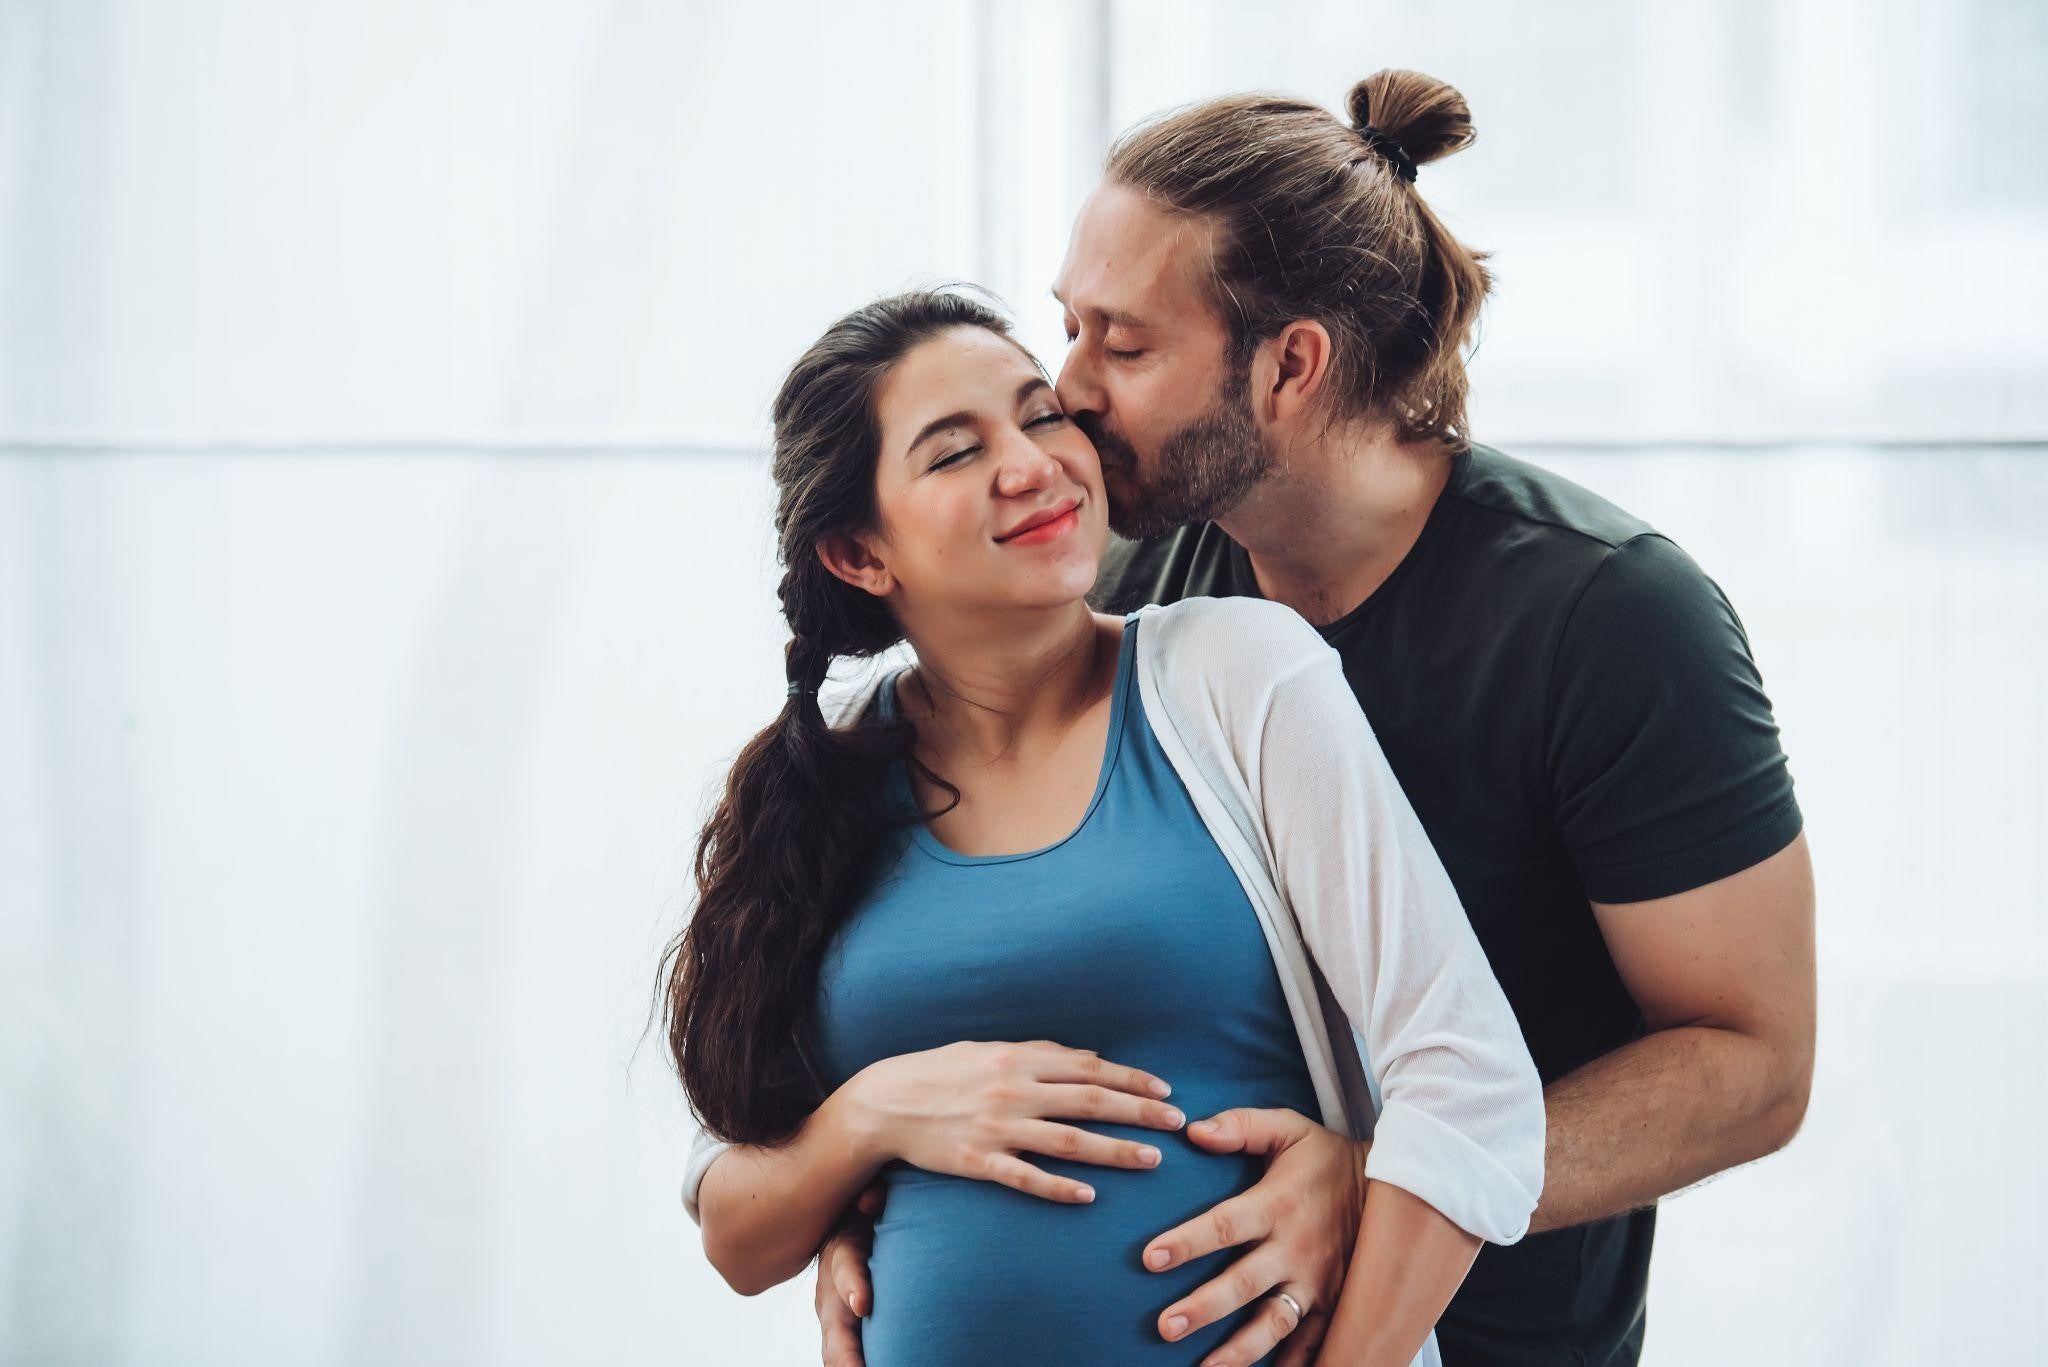 The Role of Partners in Pregnancy: Supporting Each Other Through the Experience